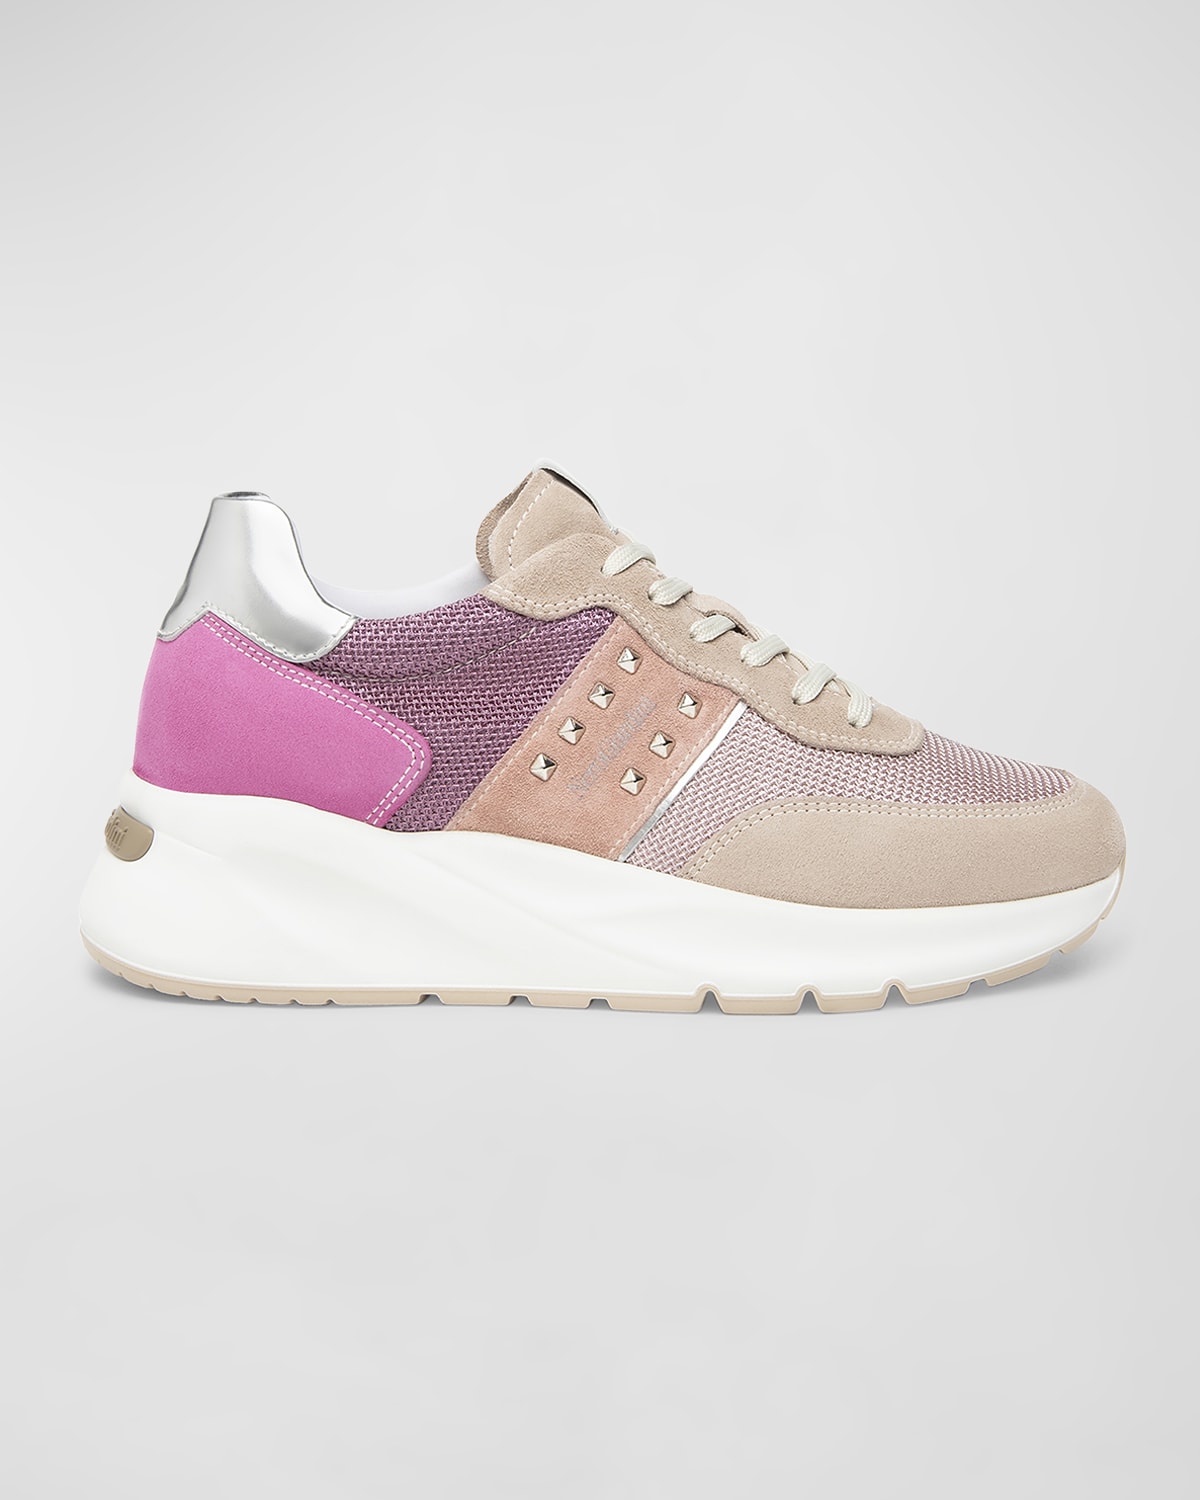 Mixed Media Colorblock Fashion Sneakers